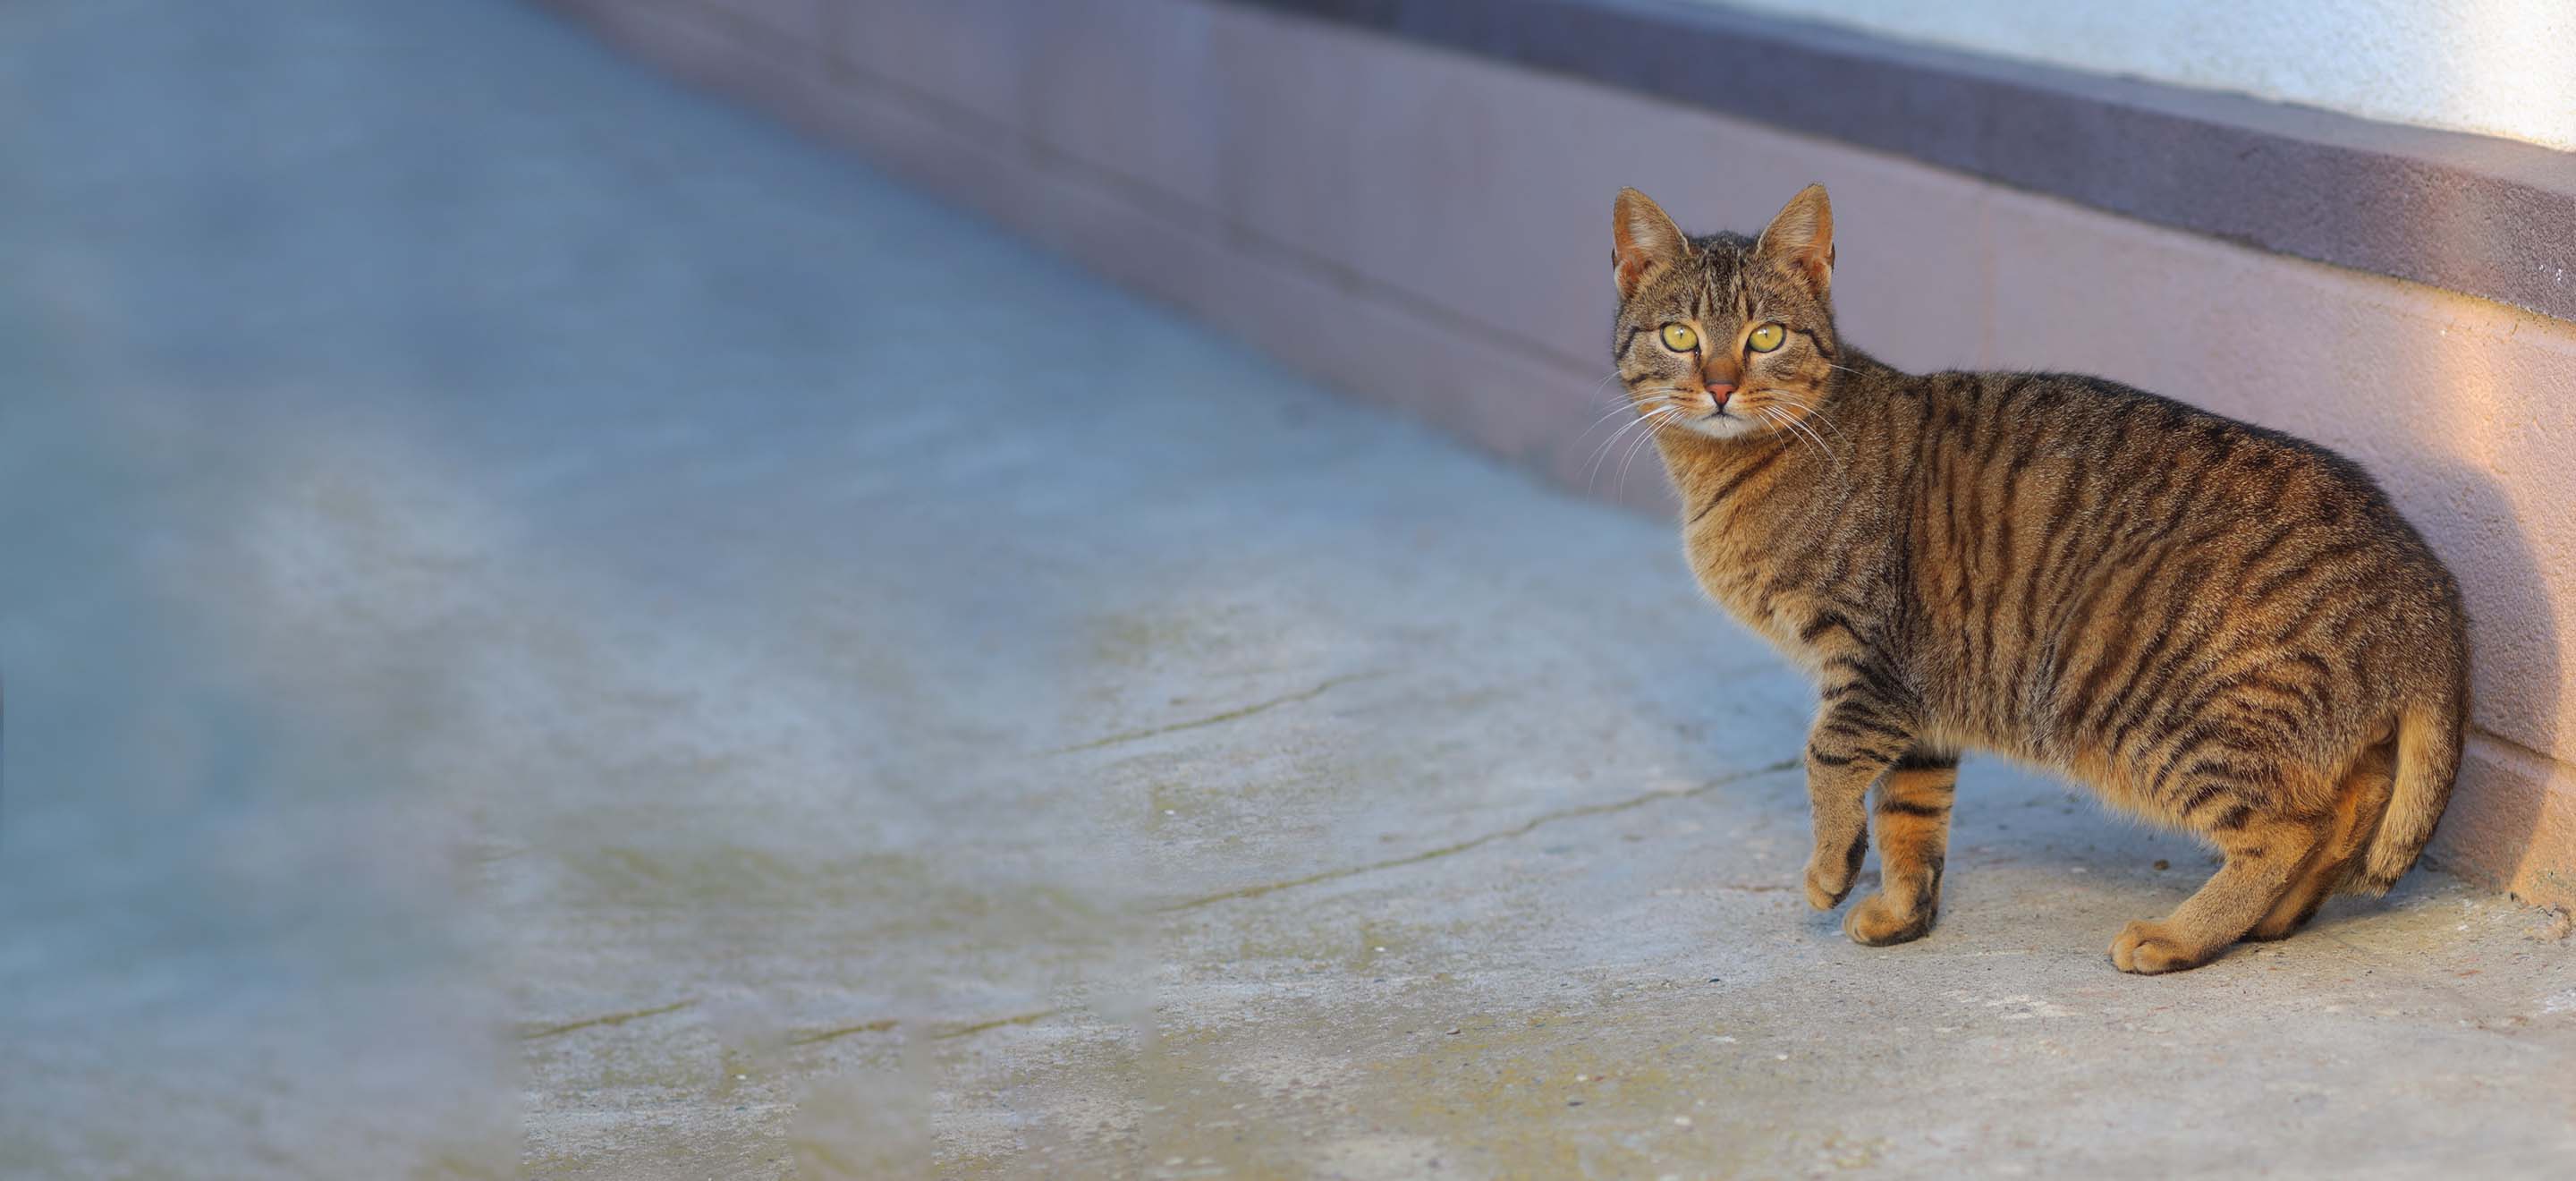 Striped American Bobtail cat sitting against a concrete wall and looking at the camera image